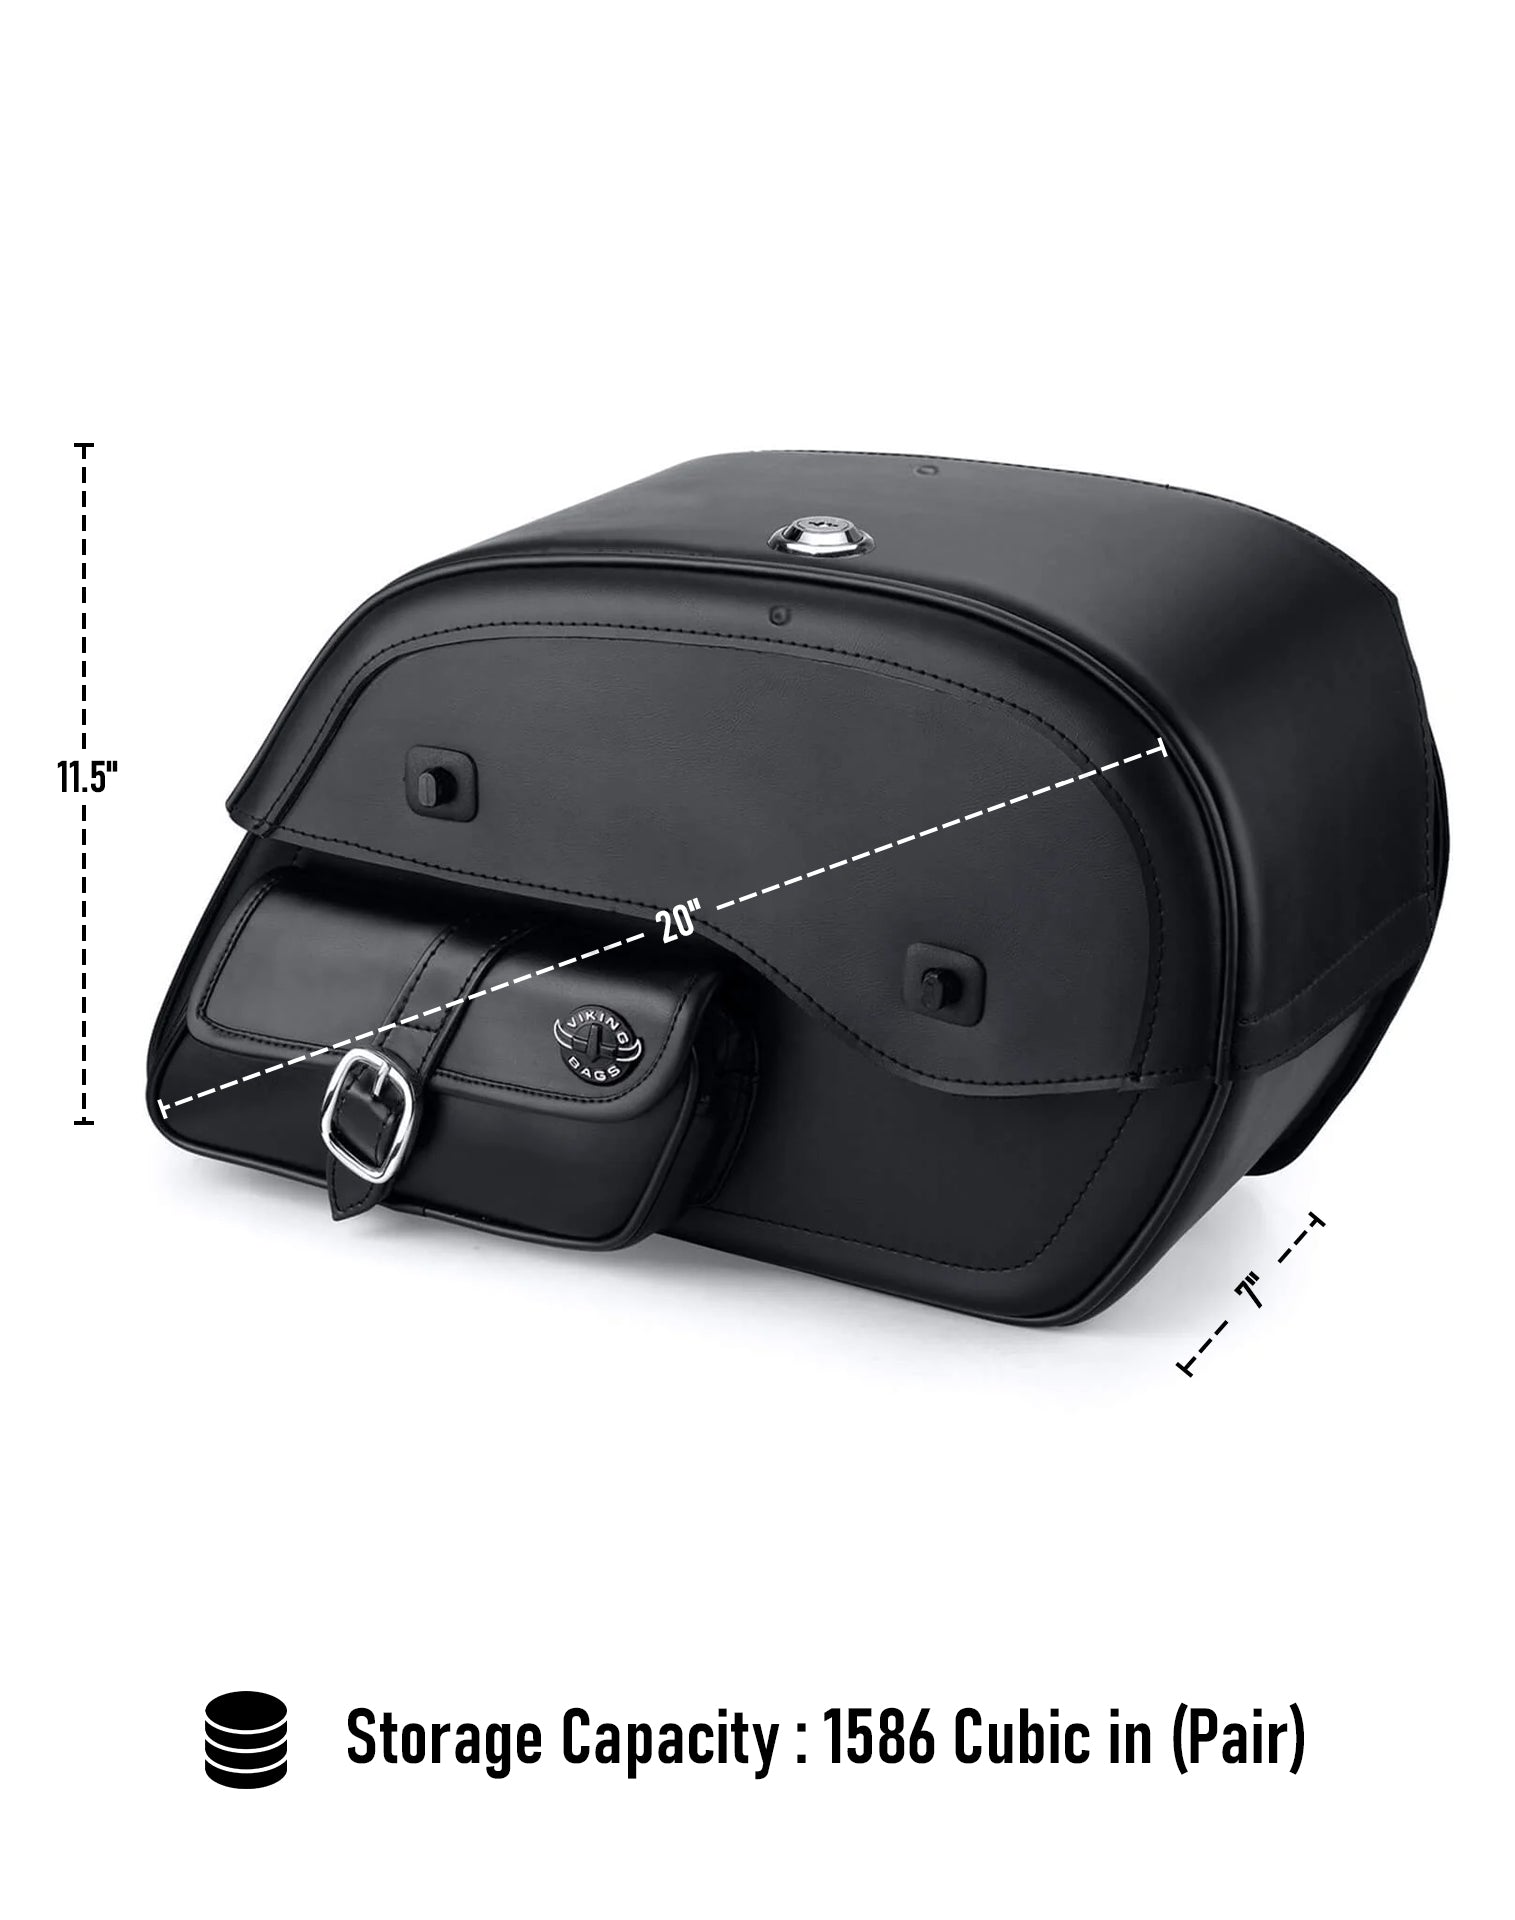 Viking Essential Side Pocket Large Hyosung Aquila Gv 250 Shock Cutout Leather Motorcycle Saddlebags Can Store Your Ridings Gears